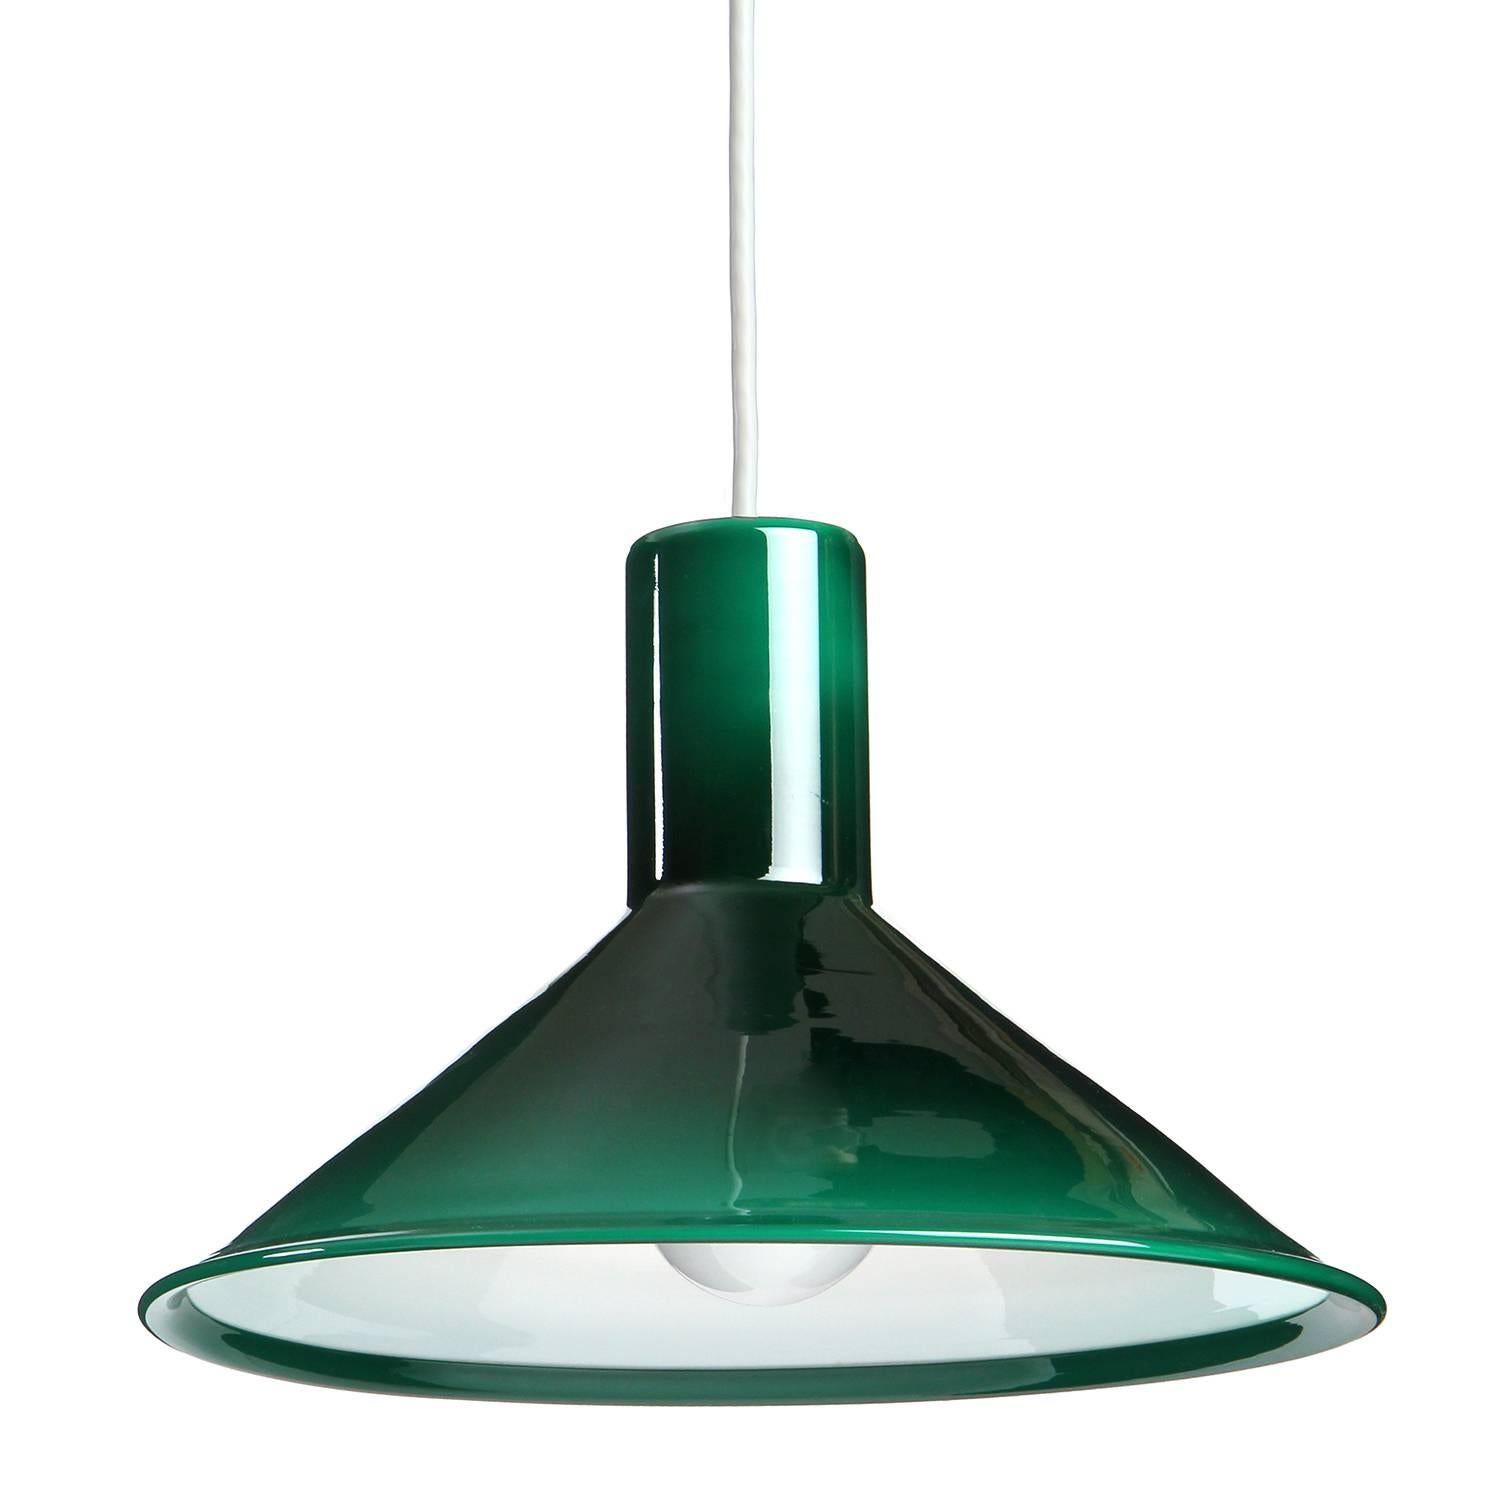 An expressive and geometric hanging pendant made of deep green glass with a white cased interior.